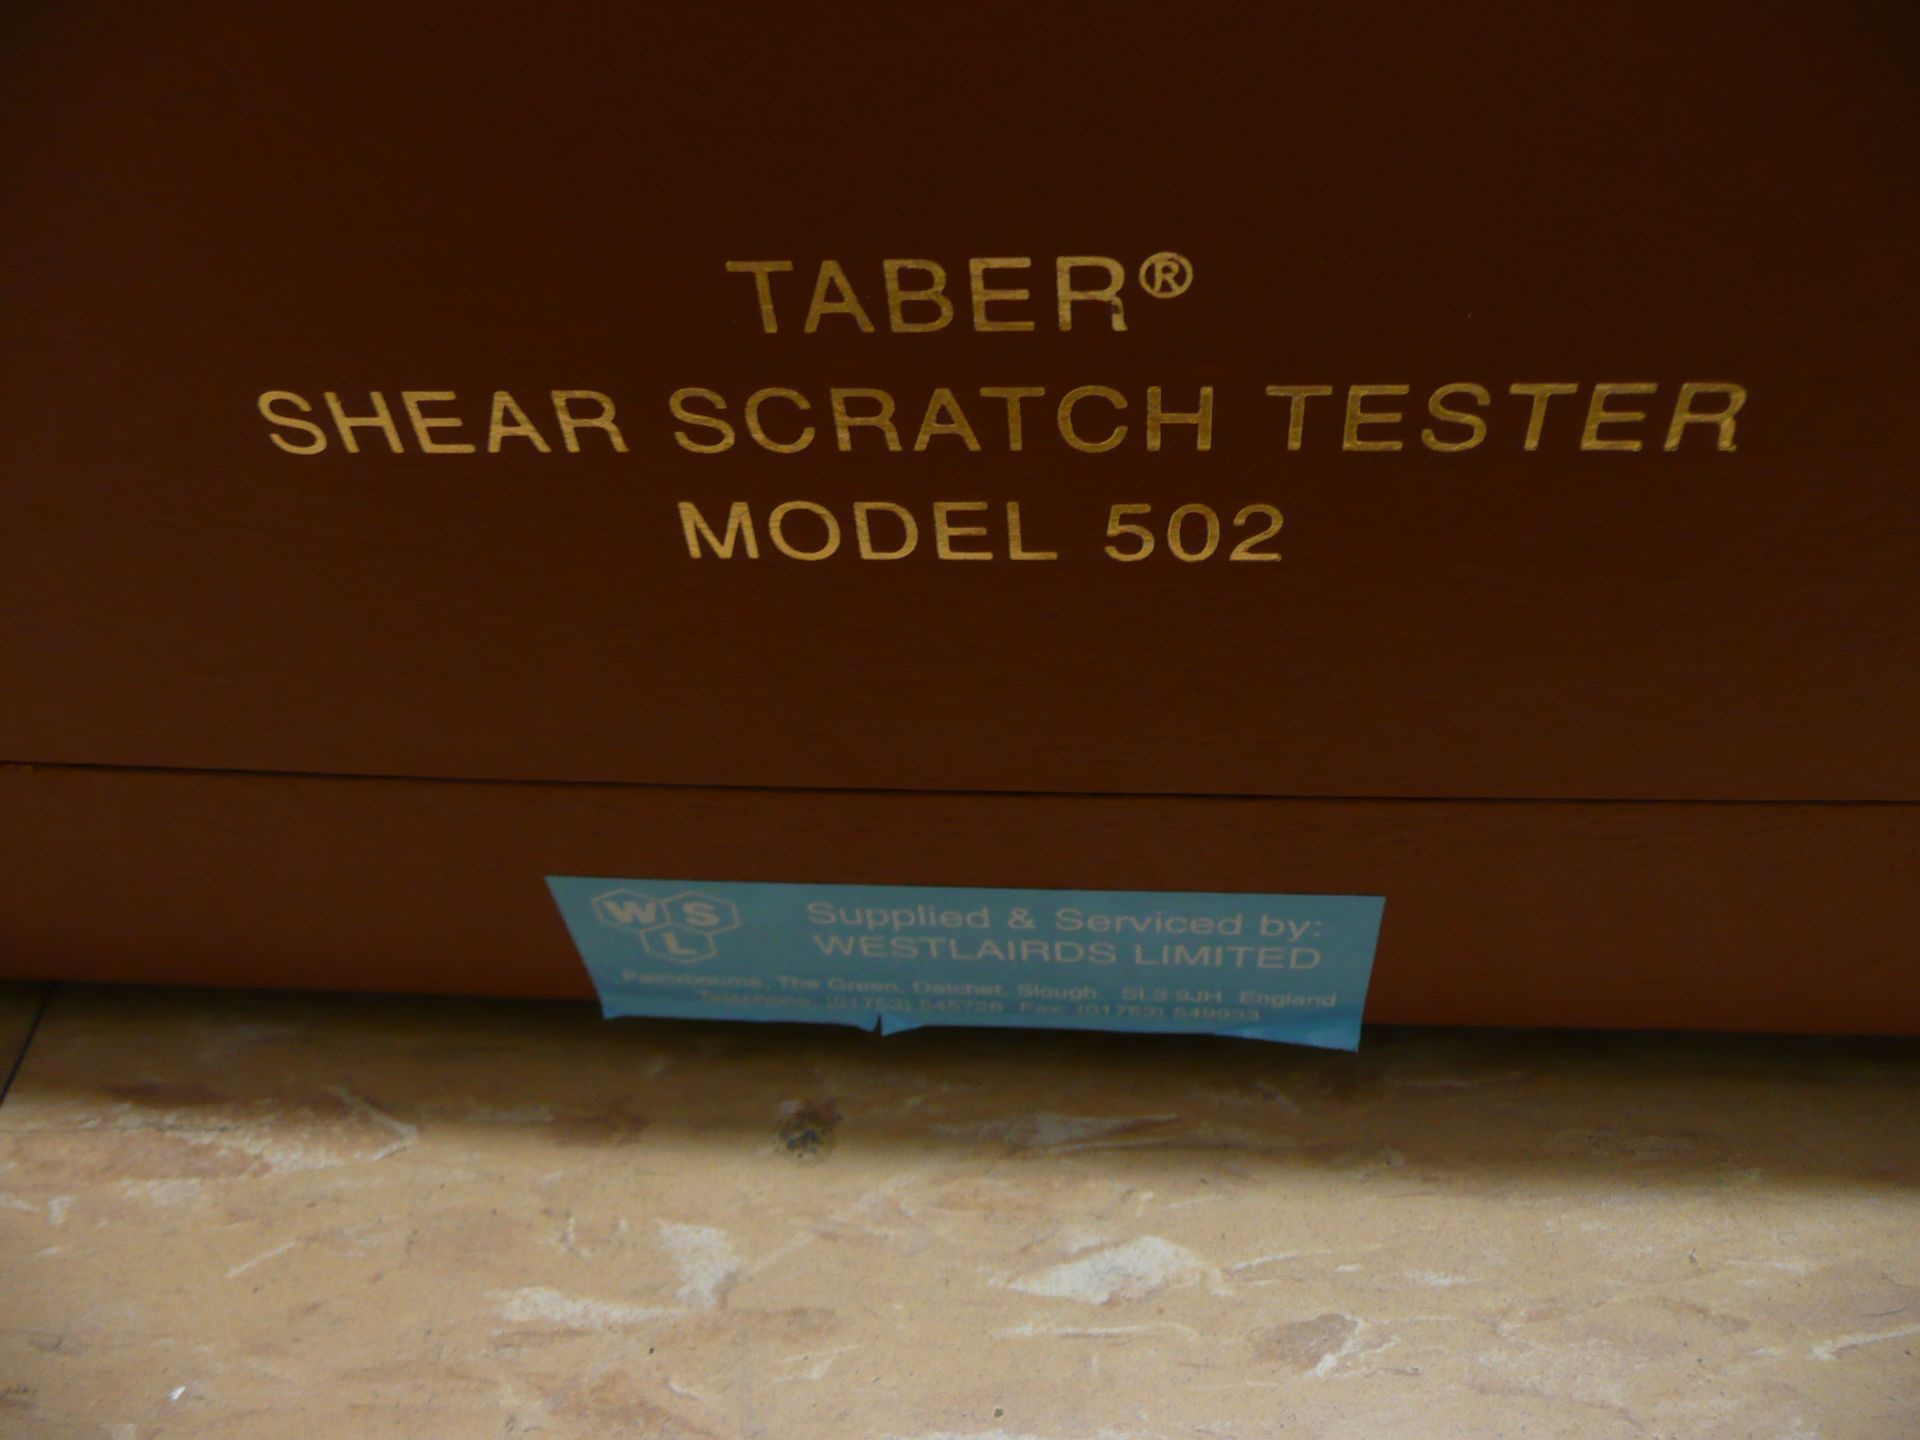 Taber, 502 shear/scratch tester with precision scale beam, specimens size should be 4" x 4" x ¼" max - Bild 3 aus 3